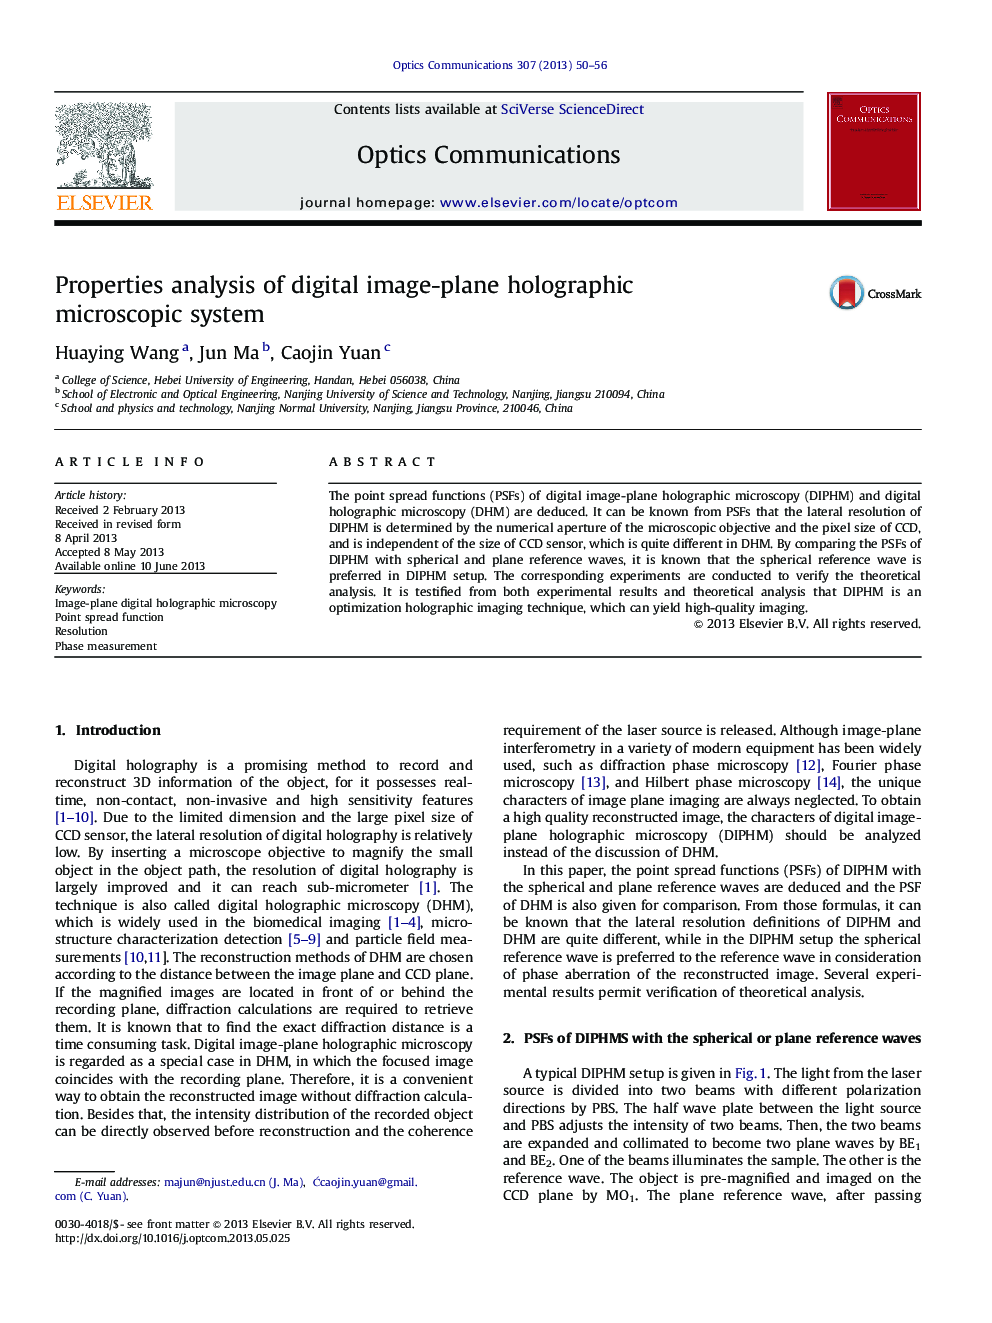 Properties analysis of digital image-plane holographic microscopic system